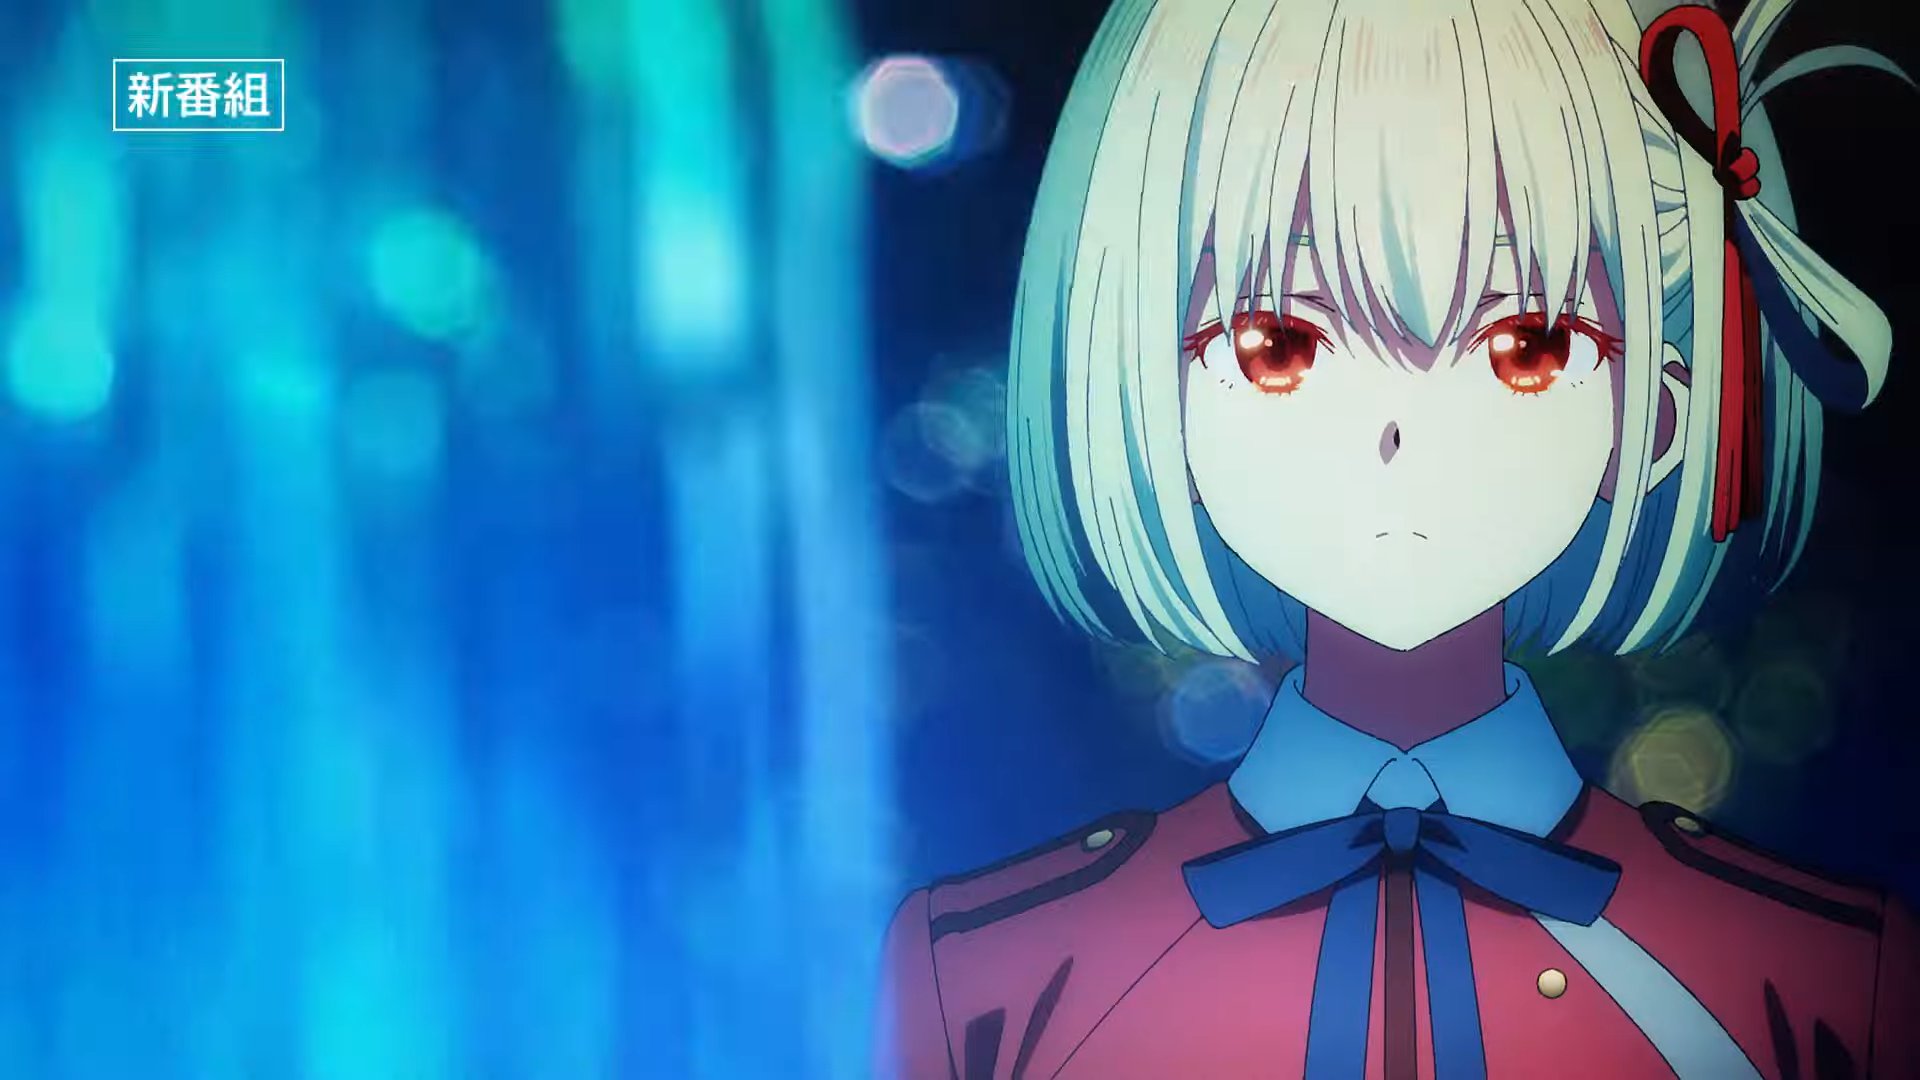 A-1 Pictures Original Anime Lycoris Recoil Gets New Trailer, July 2 Premiere